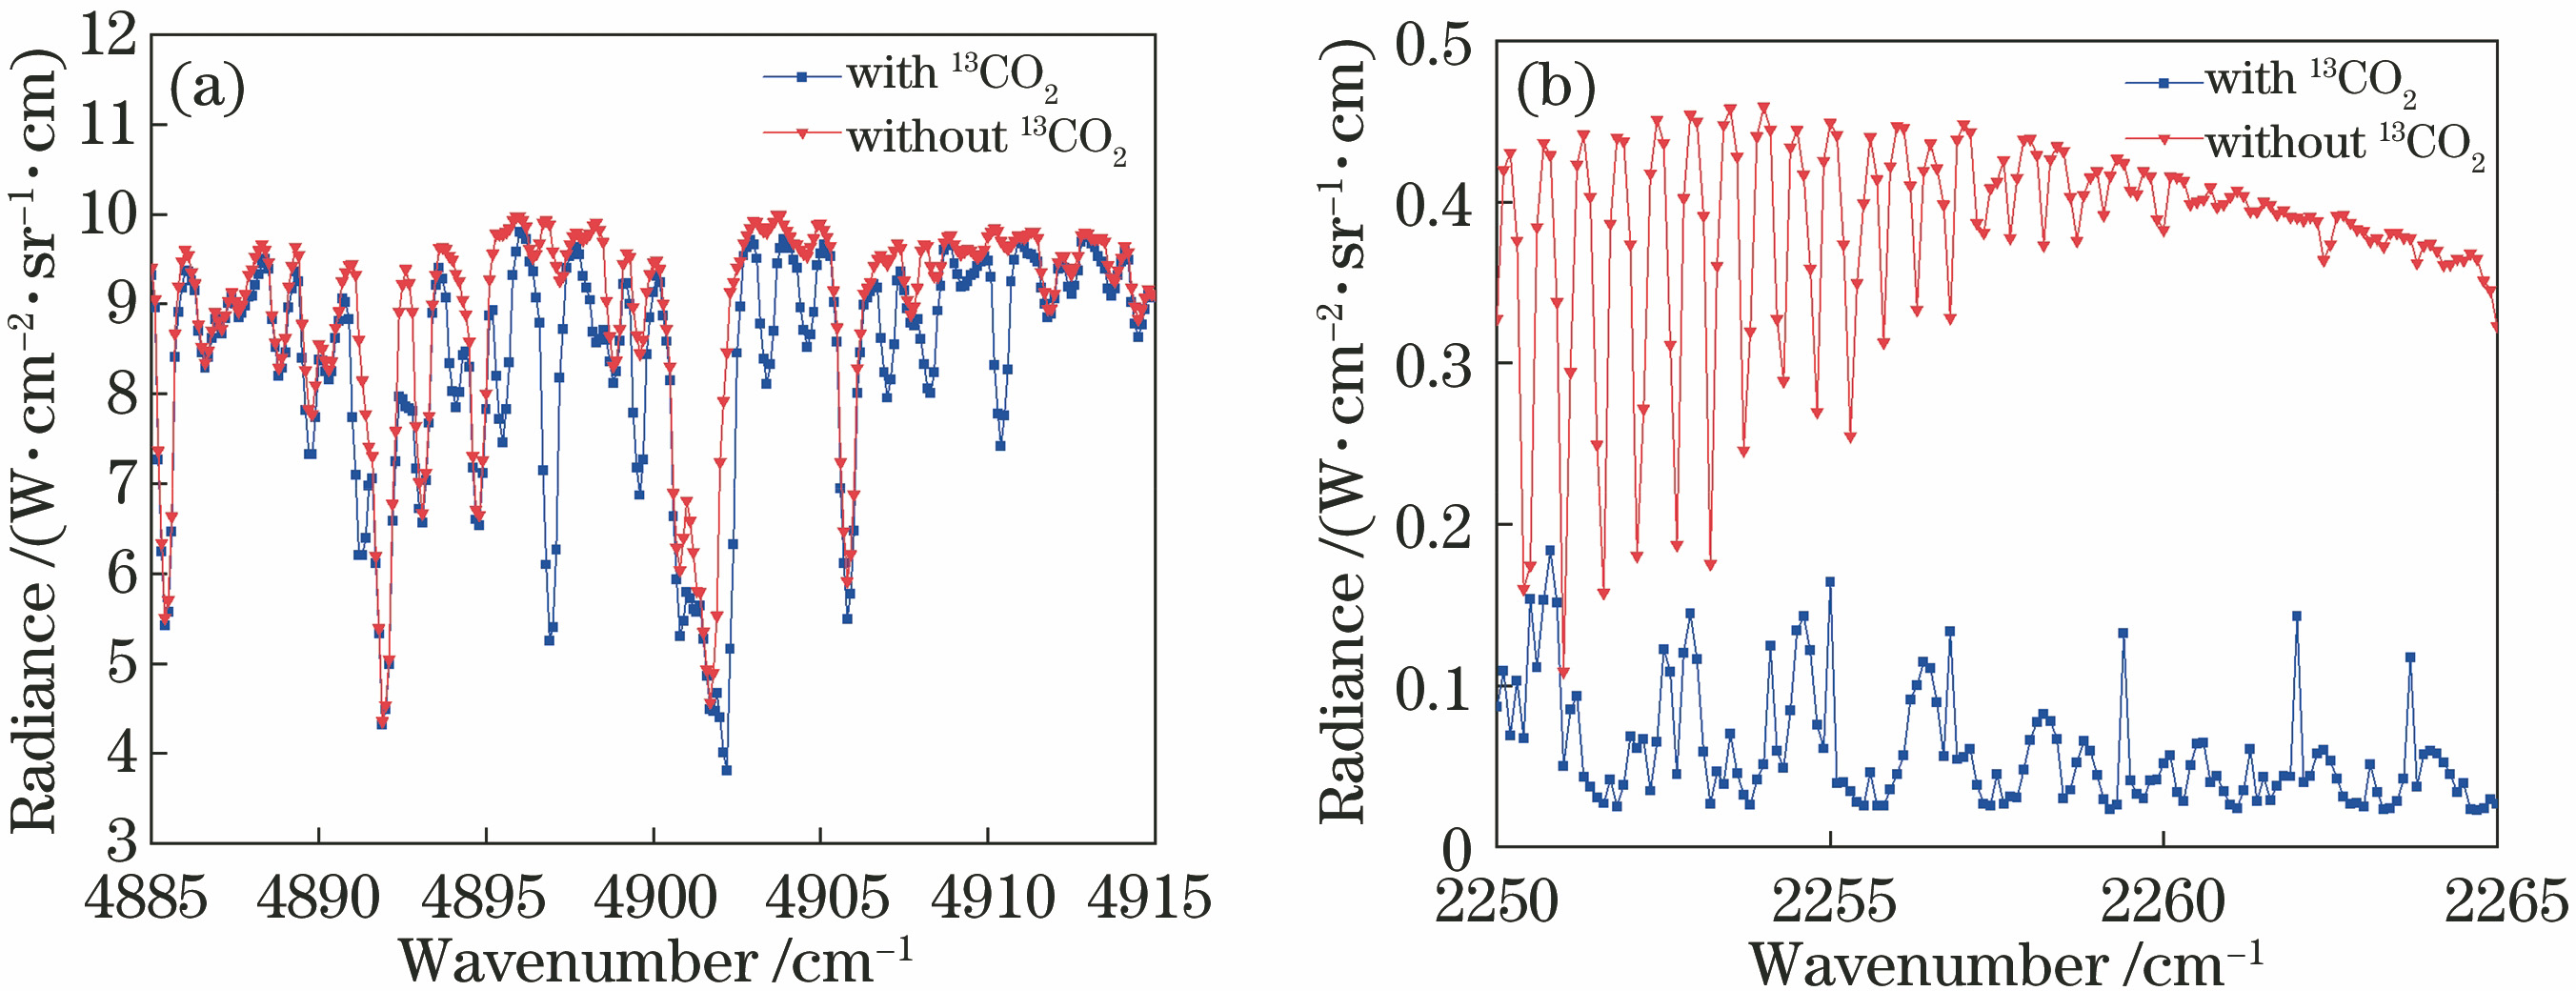 Sensitivity of near infrared and mid-infrared spectroscopy to 13CO2. (a) Near infrared band; (b) mid-infrared band